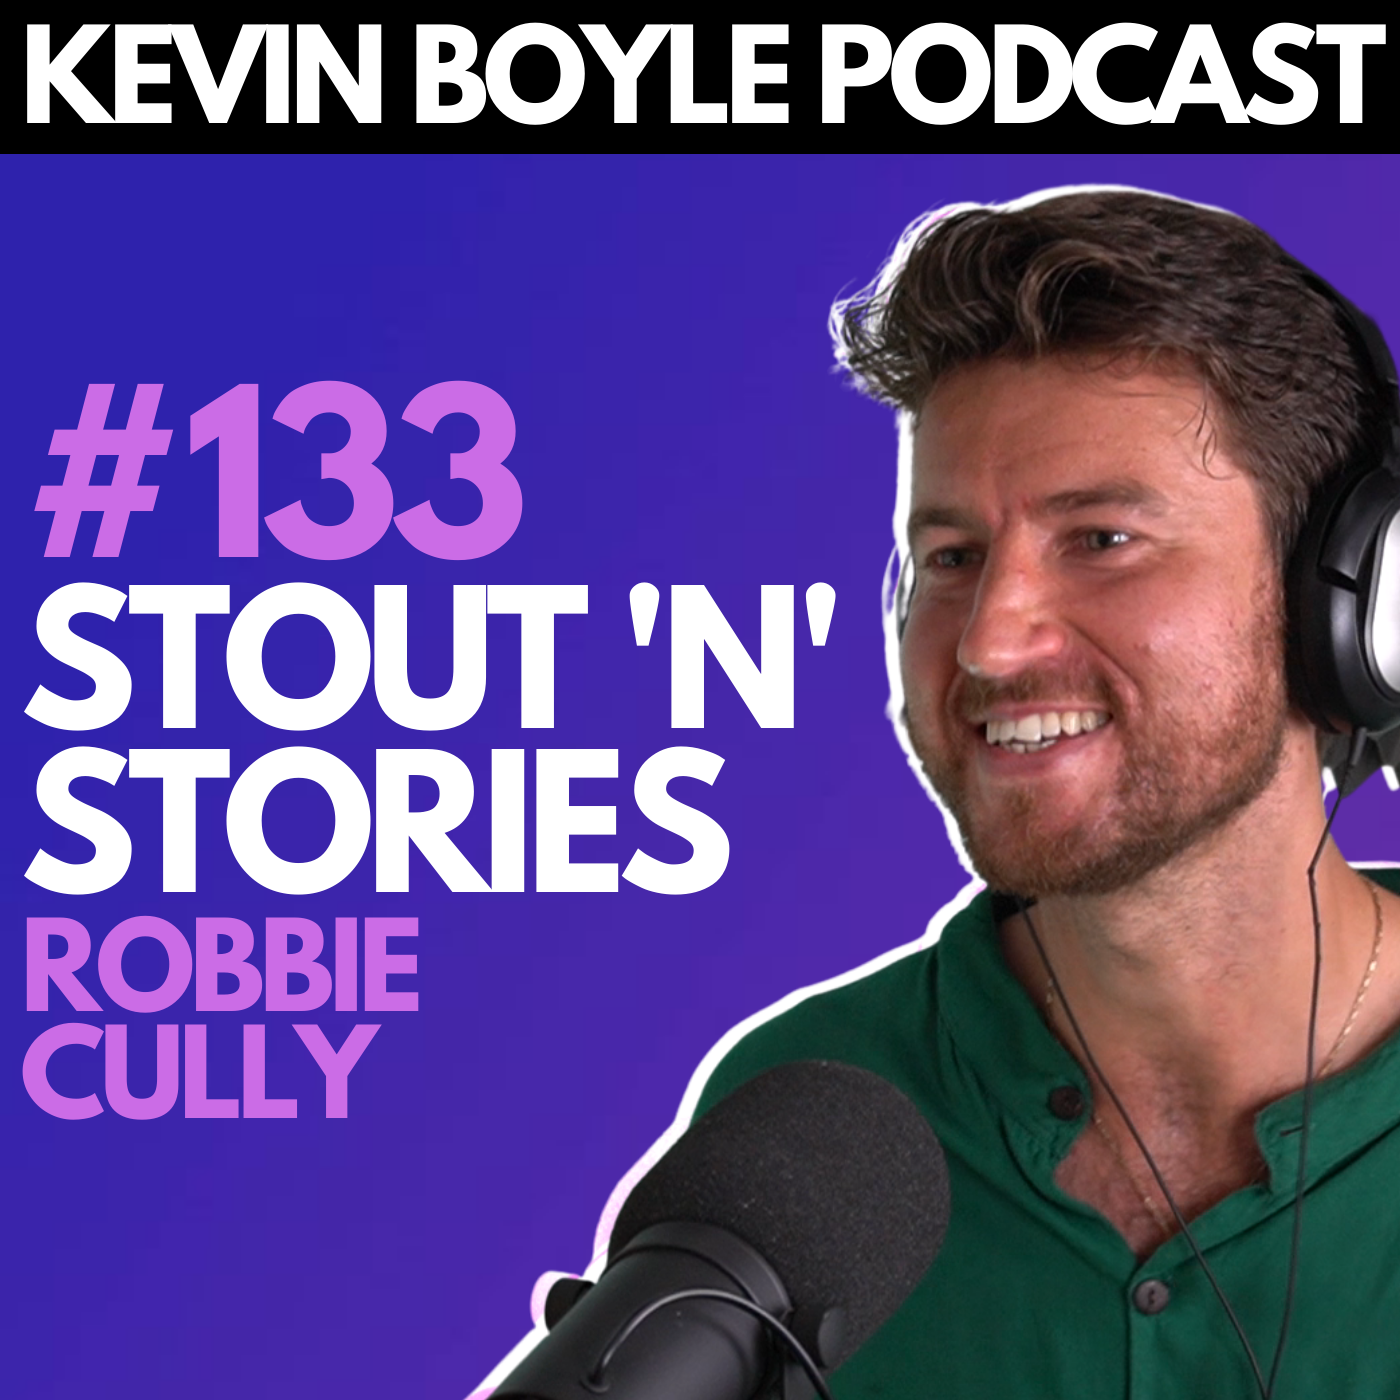 #133: Robbie Cully - Stout 'N' Stories